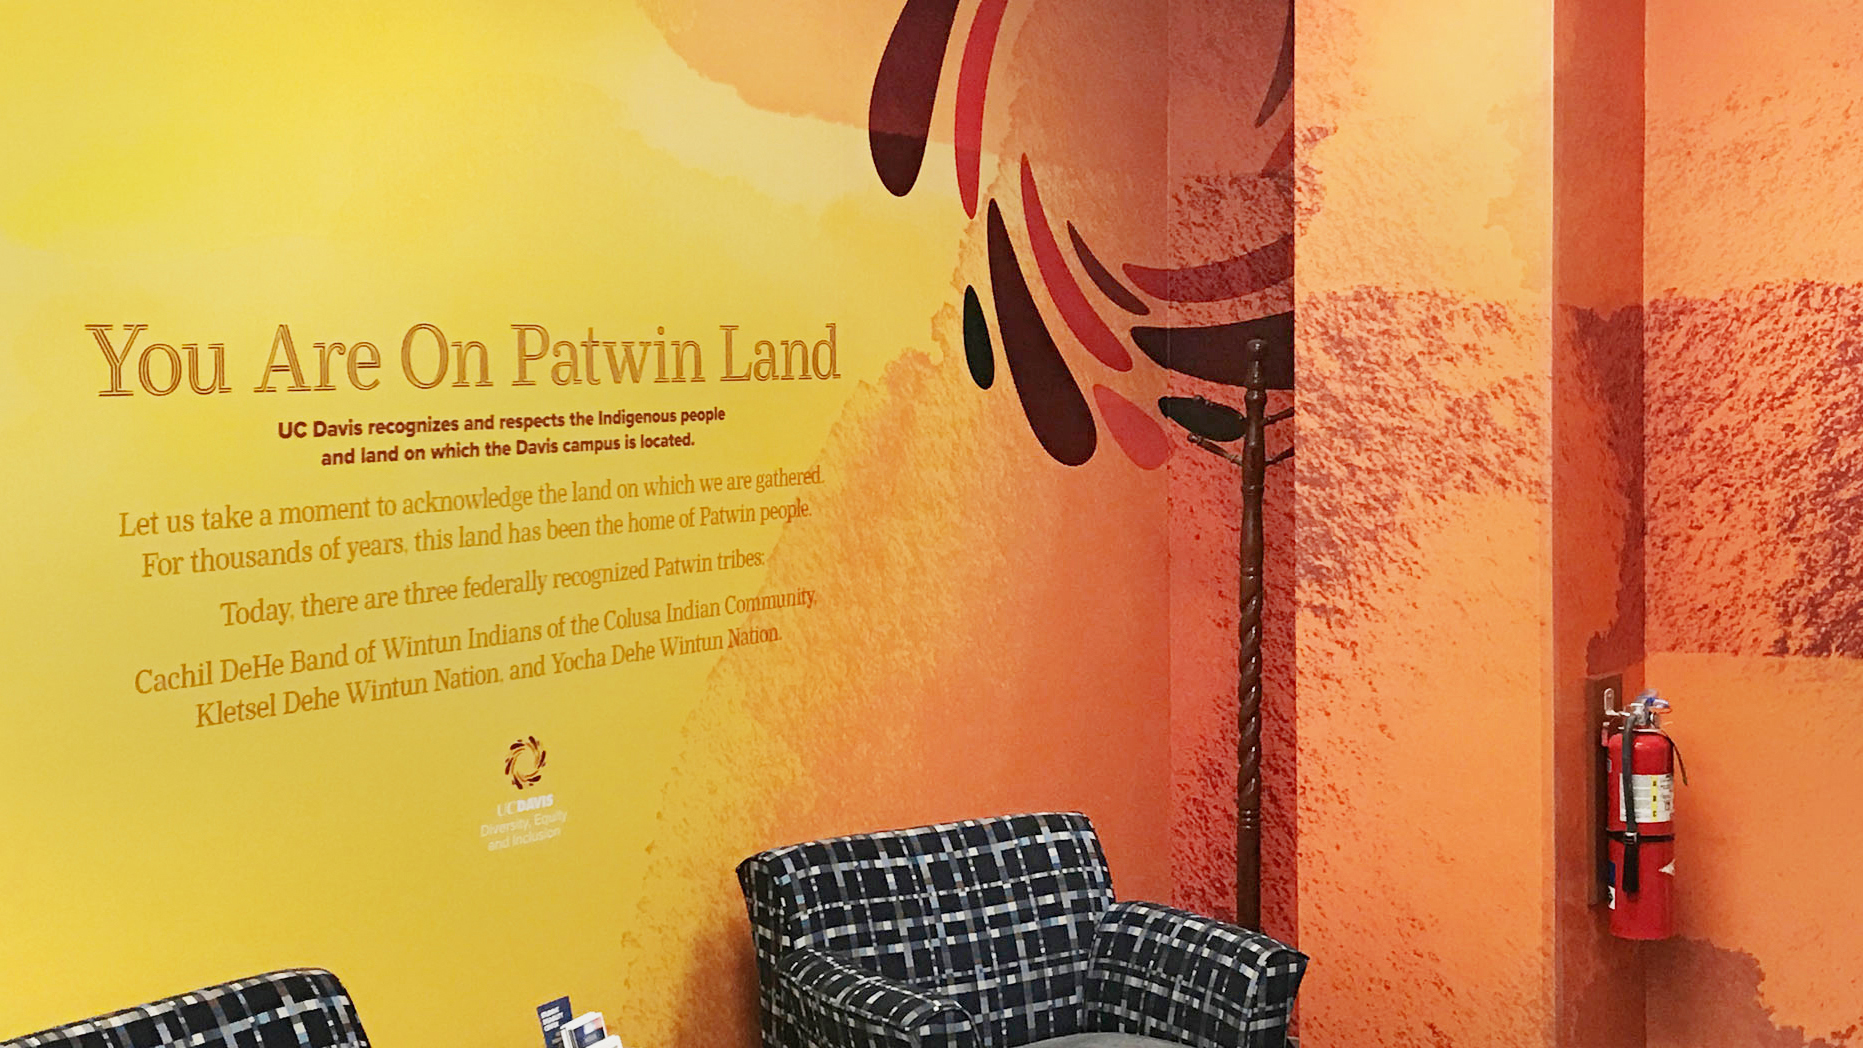 Diversity, Equity and Inclusion office wrap, yellows and oranges, and "You Are on Patwin Land" inscription 